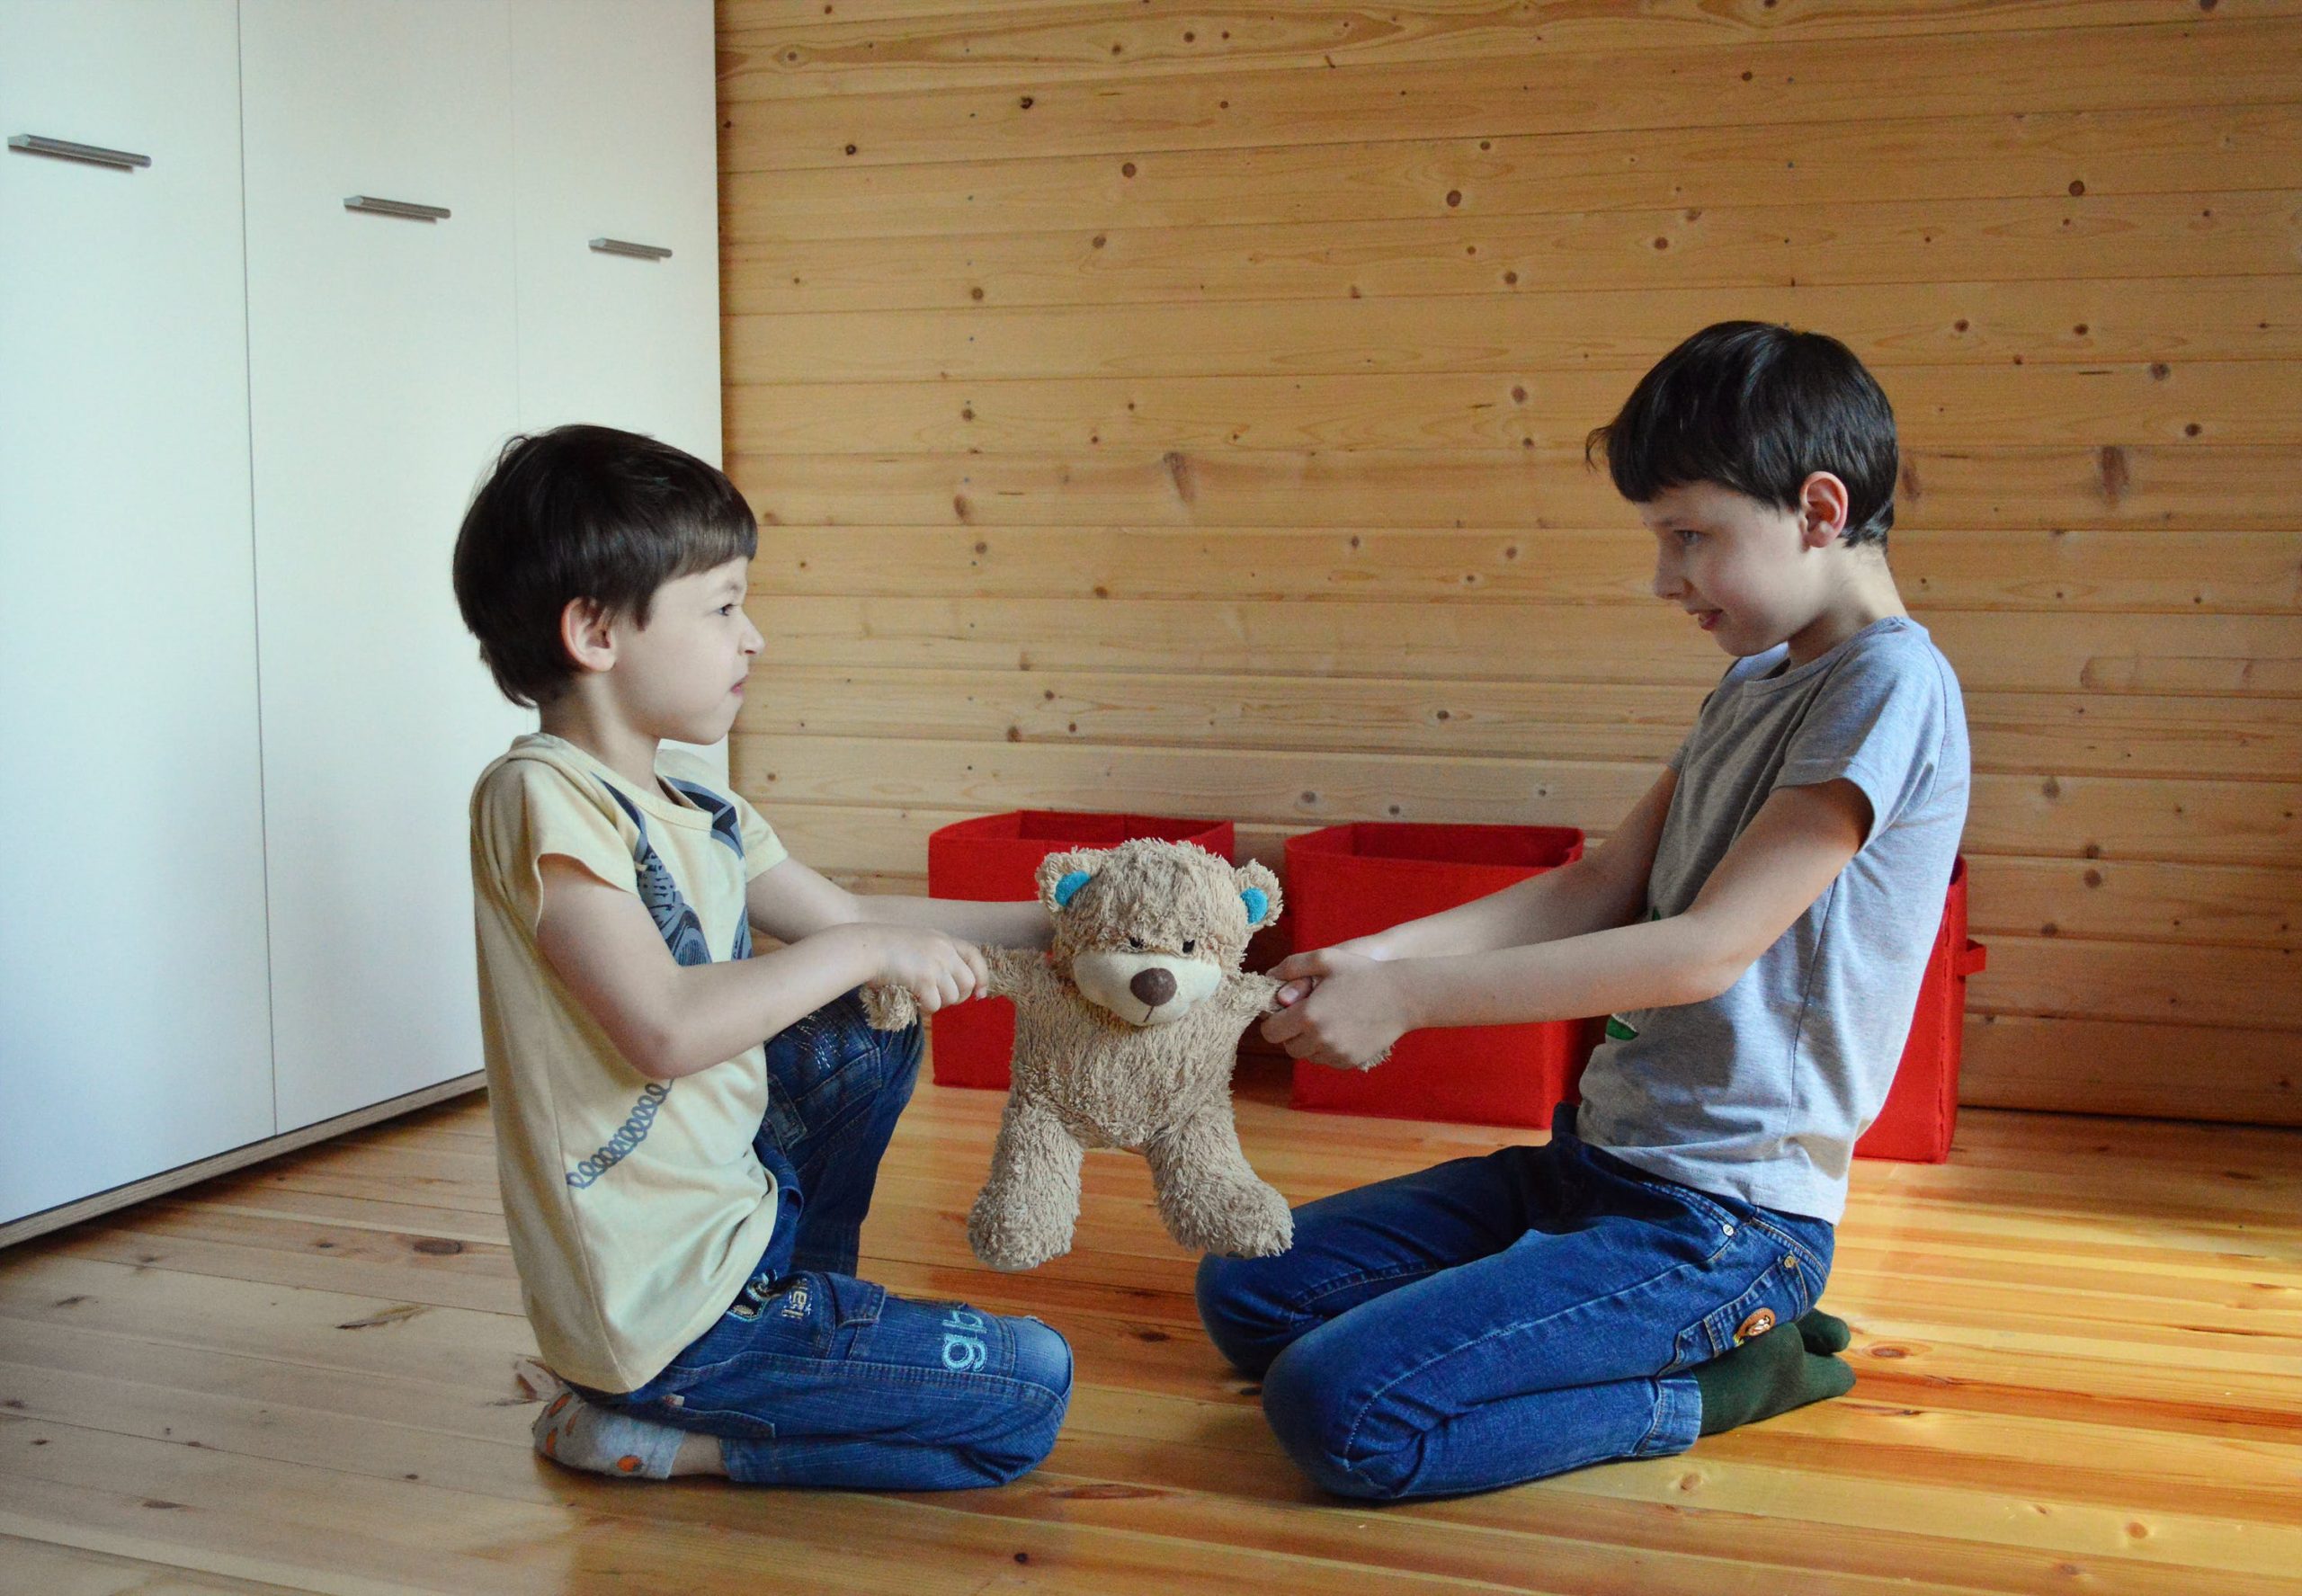 Two boys sitting on a wooden floor playing tug of war with a teddy bear indoors. 